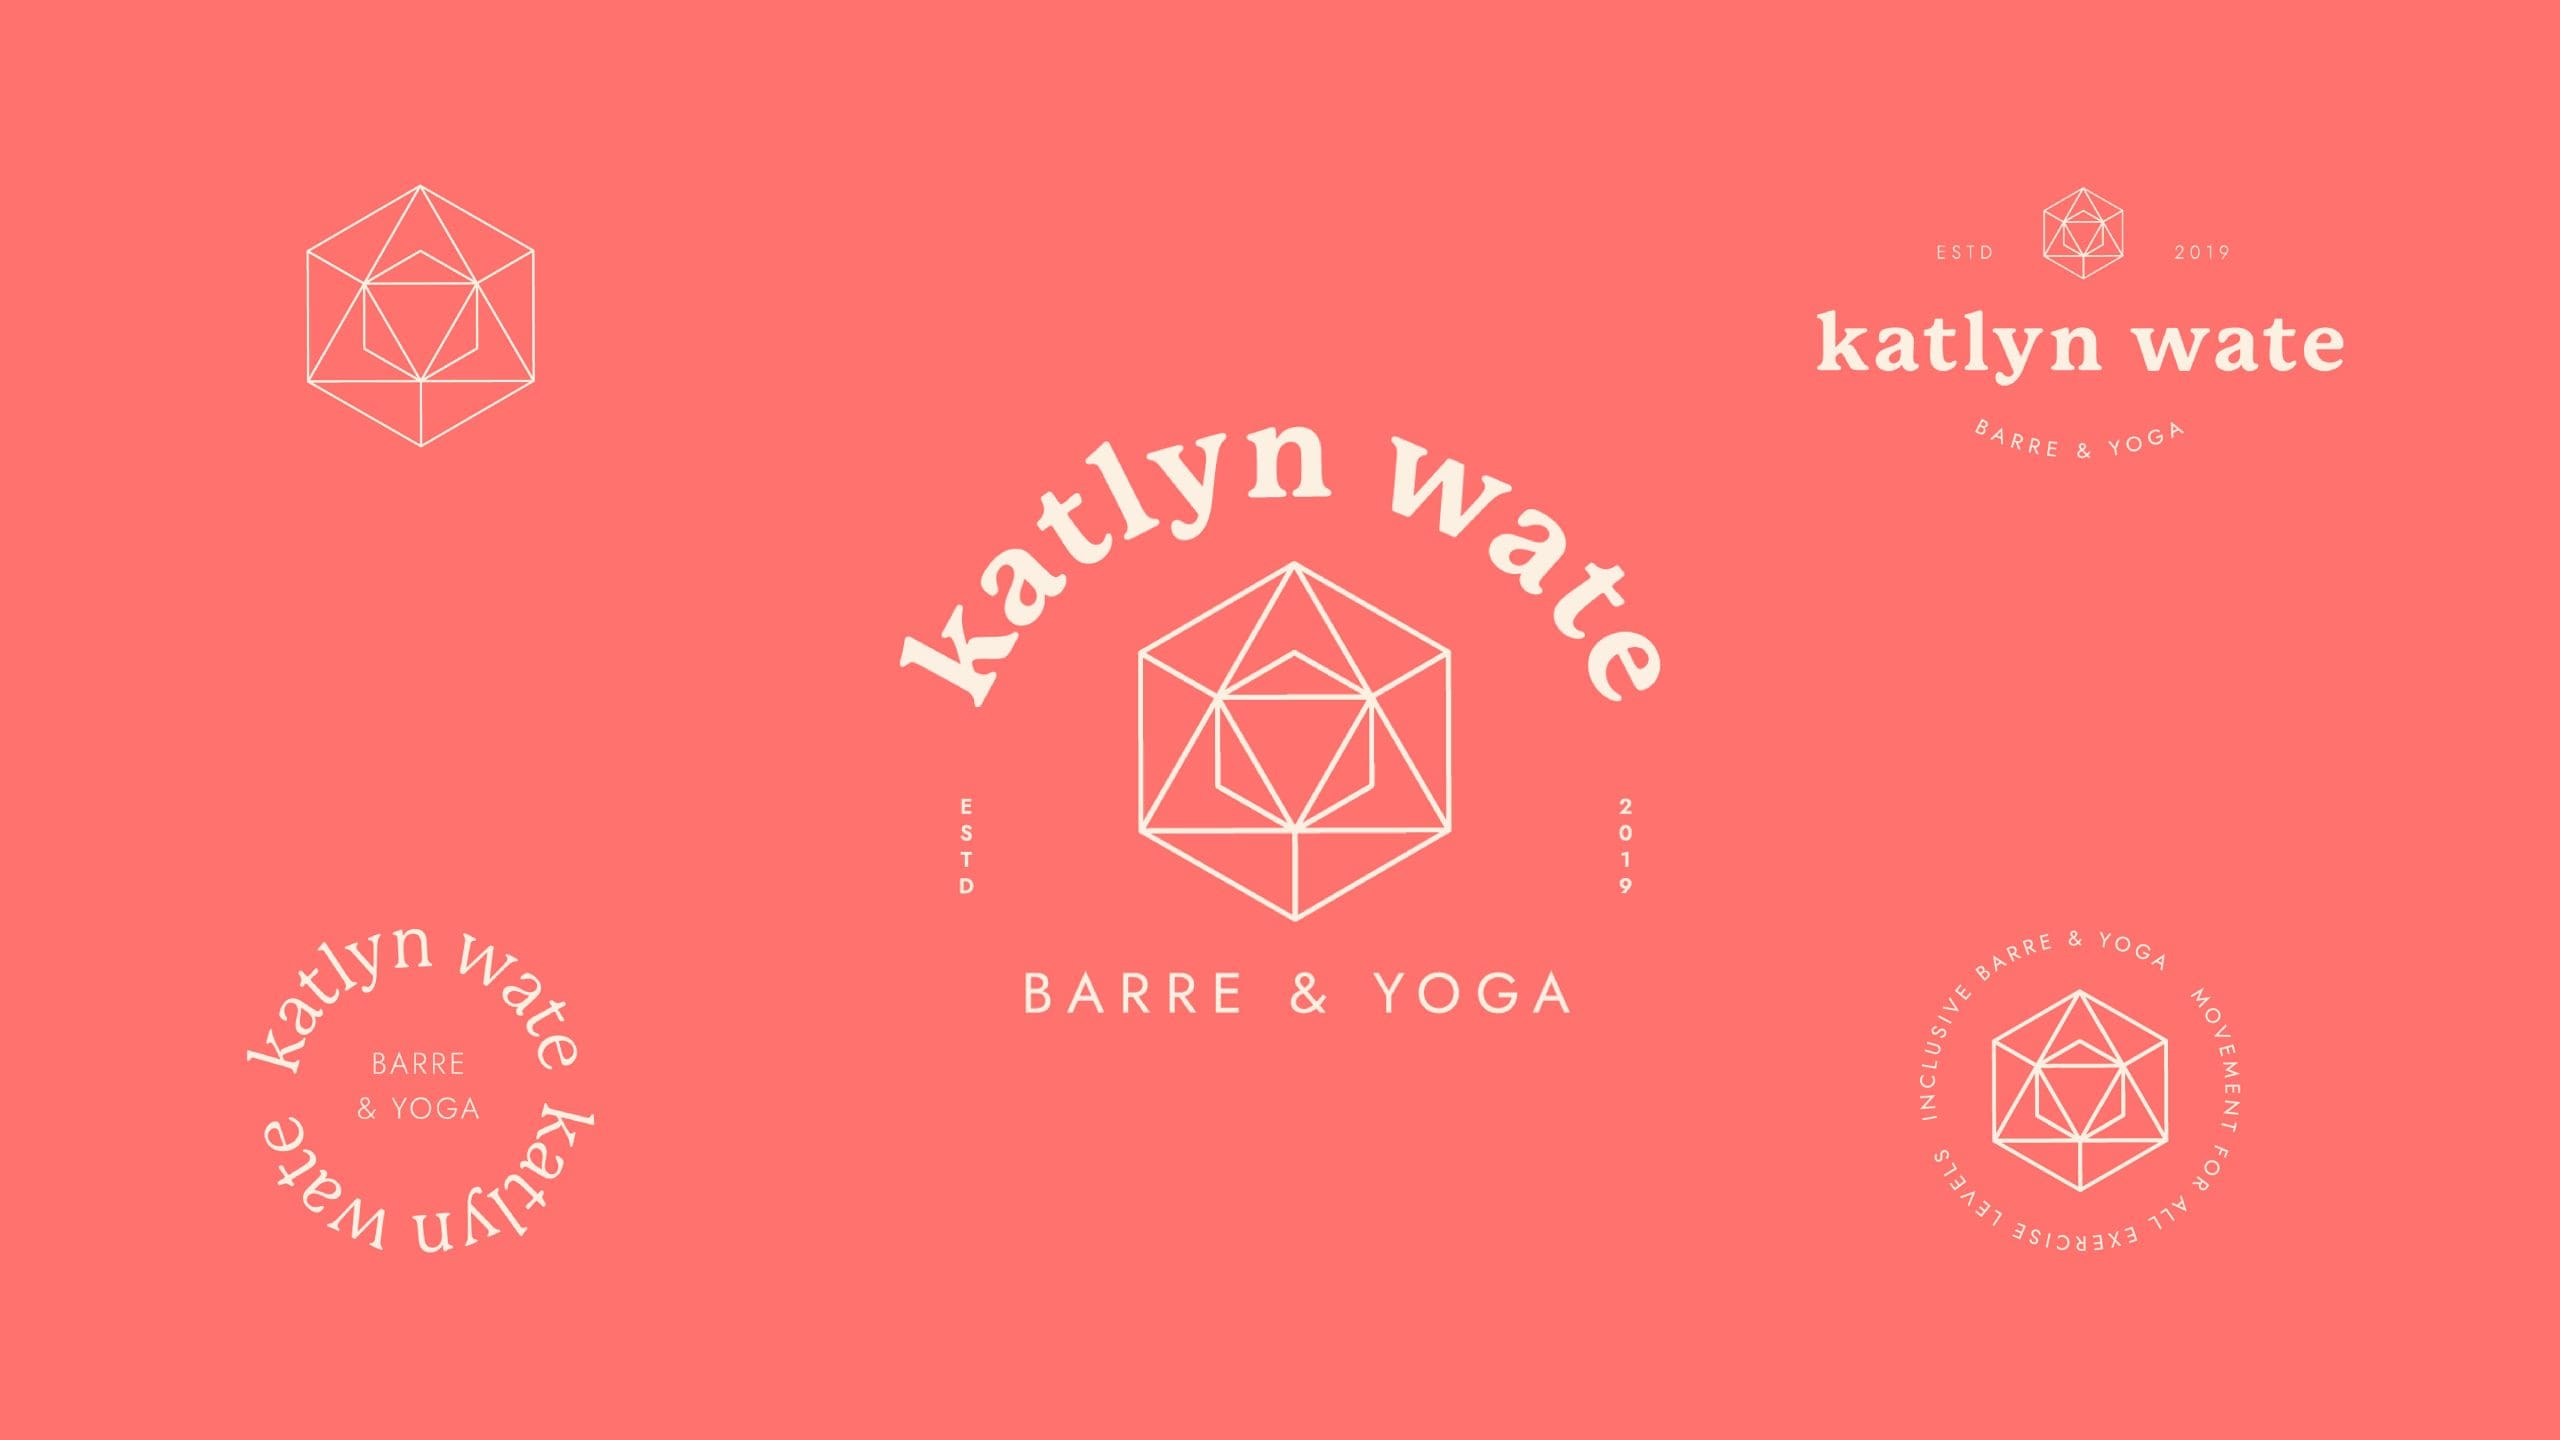 Primary and secondary logo, brandmark, and primary and secondary submarks for Katlyn Wate.